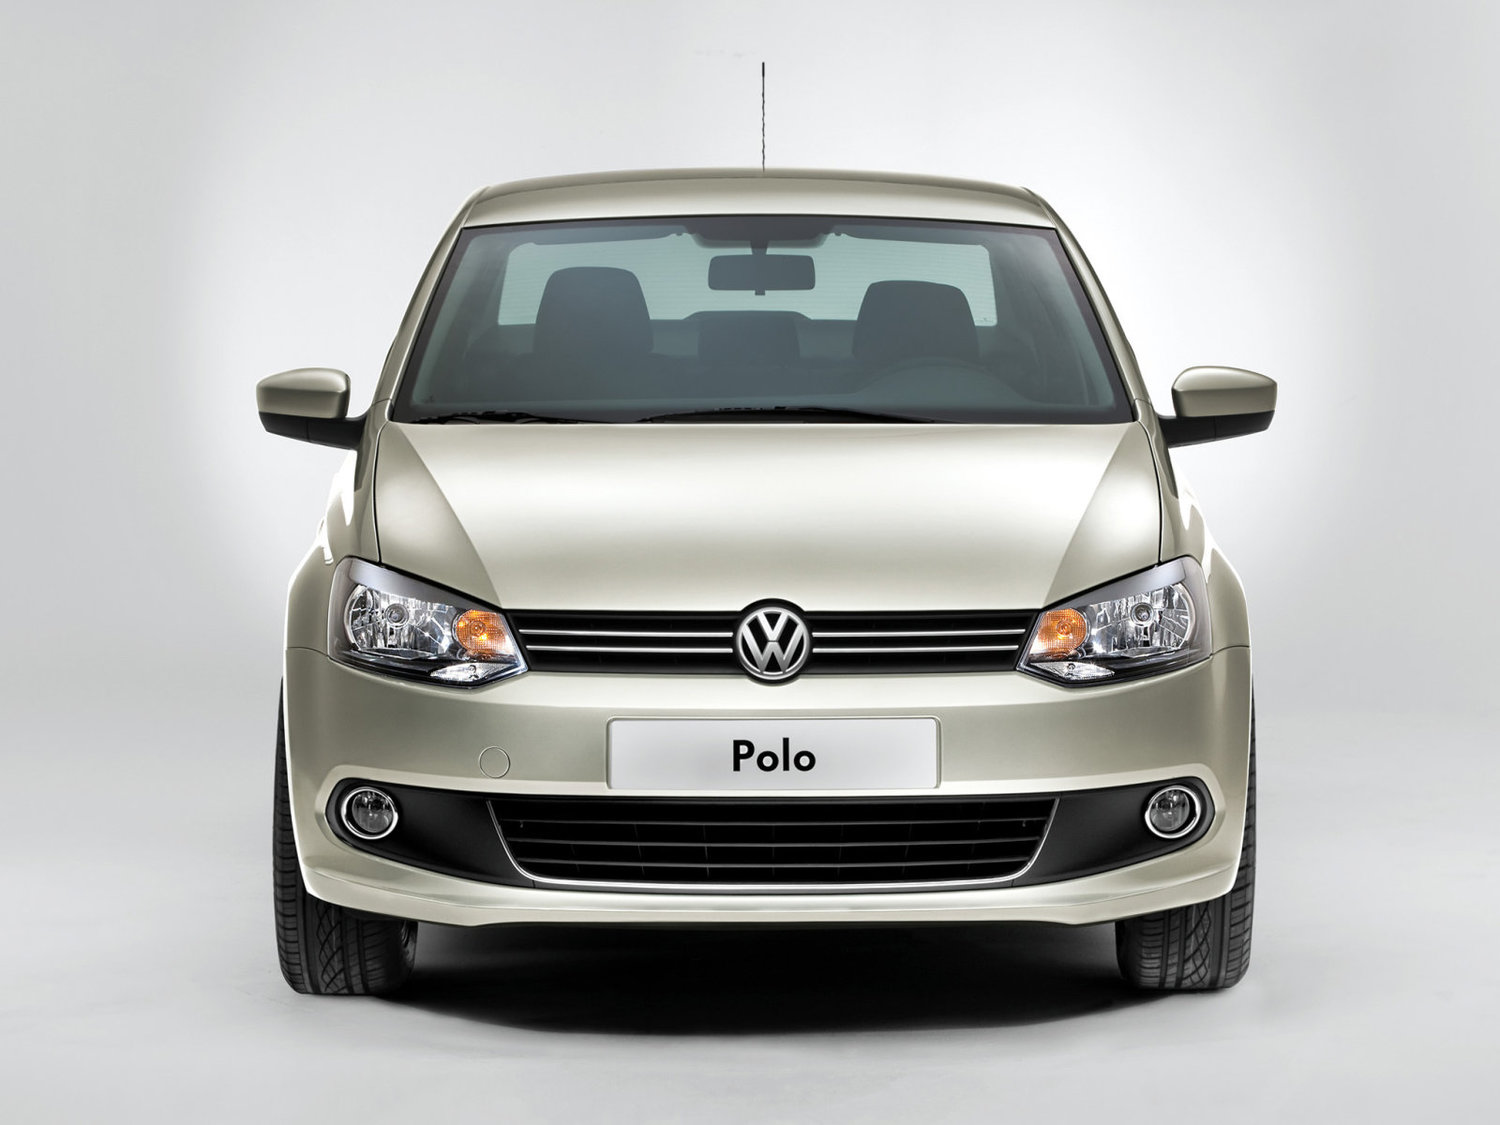 <span style="font-weight: bold;">VOLKSWAGEN POLO<br></span>